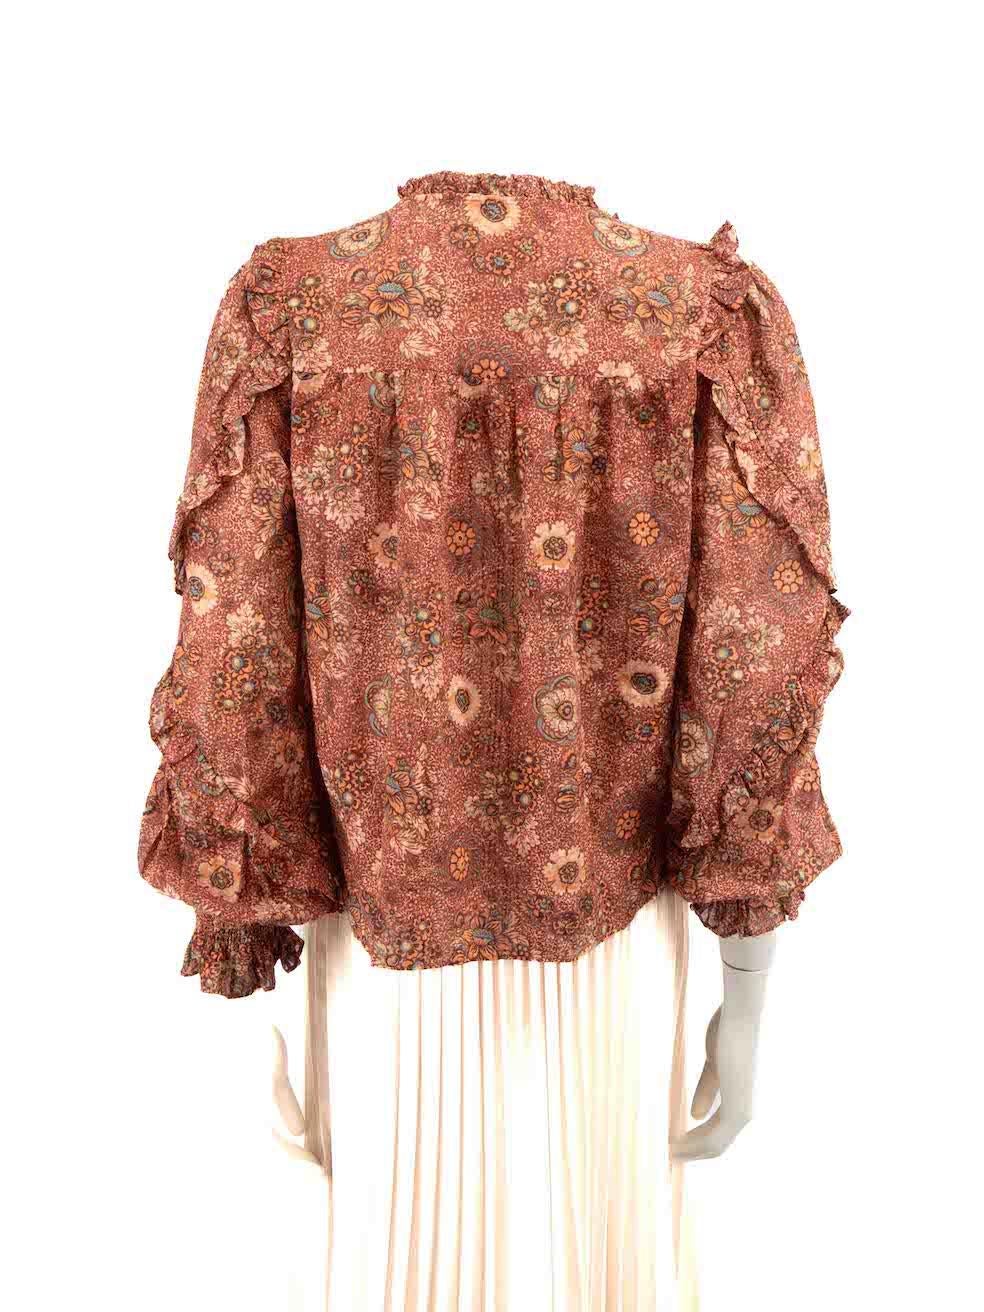 Ulla Johnson Brown Floral Ruffle Accent Top Size S In Good Condition For Sale In London, GB